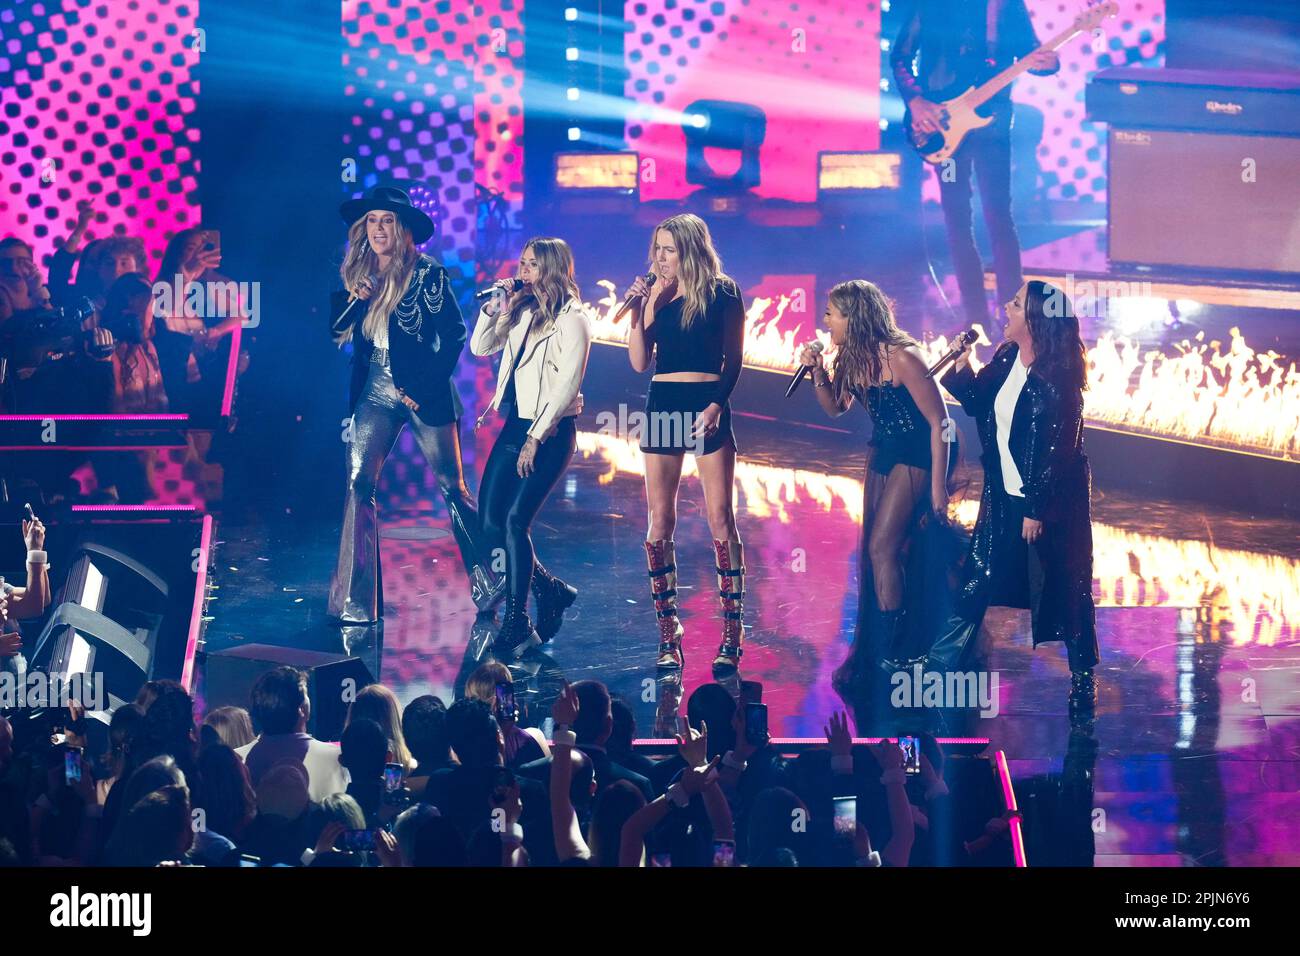 Singers LAINEY WILSON, MORGAN WADE, INGRID ANDRESS and MADELINE EDWARDS appear along with ALANIS MORISETTE (far right) to celebrate the 'Next Women of Country' 10th anniversary onstage at the 2023 Country Music Television (CMT) Music Awards held for the first time in Austin, Texas on April 2, 2023 at the Moody Center before a sold out crowd. Credit: Bob Daemmrich/Alamy Live News Stock Photo